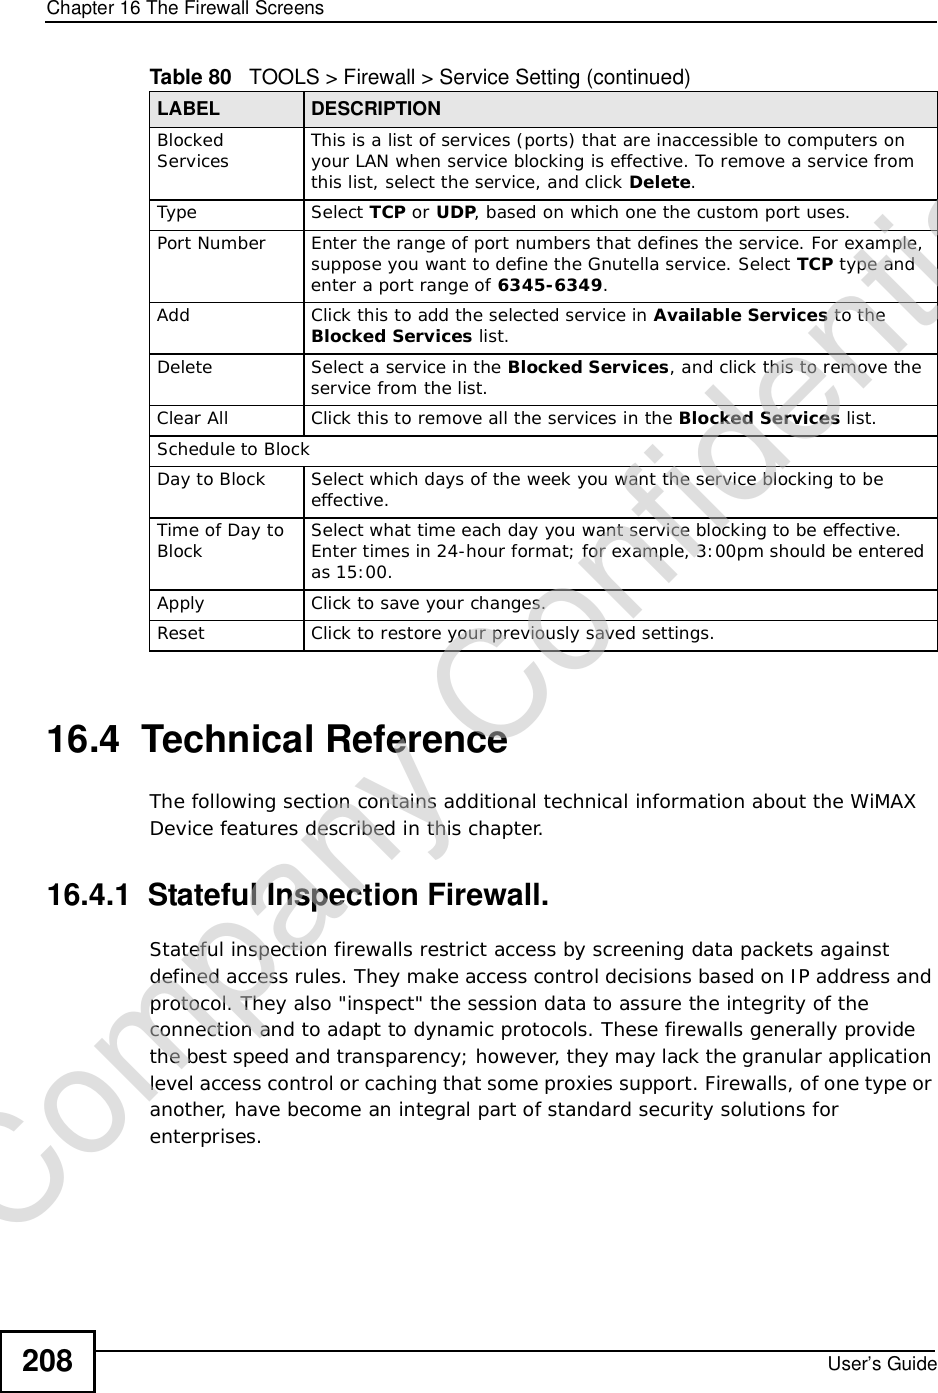 Chapter 16The Firewall ScreensUser’s Guide20816.4  Technical ReferenceThe following section contains additional technical information about the WiMAX Device features described in this chapter.16.4.1  Stateful Inspection Firewall.Stateful inspection firewalls restrict access by screening data packets against defined access rules. They make access control decisions based on IP address and protocol. They also &quot;inspect&quot; the session data to assure the integrity of the connection and to adapt to dynamic protocols. These firewalls generally provide the best speed and transparency; however, they may lack the granular application level access control or caching that some proxies support. Firewalls, of one type or another, have become an integral part of standard security solutions for enterprises.Blocked Services This is a list of services (ports) that are inaccessible to computers on your LAN when service blocking is effective. To remove a service from this list, select the service, and click Delete.Type Select TCP or UDP, based on which one the custom port uses.Port Number Enter the range of port numbers that defines the service. For example, suppose you want to define the Gnutella service. Select TCP type and enter a port range of 6345-6349.Add Click this to add the selected service in Available Services to the Blocked Services list.Delete Select a service in the Blocked Services, and click this to remove the service from the list.Clear All Click this to remove all the services in the Blocked Services list.Schedule to BlockDay to Block Select which days of the week you want the service blocking to be effective.Time of Day to Block Select what time each day you want service blocking to be effective. Enter times in 24-hour format; for example, 3:00pm should be entered as 15:00.Apply Click to save your changes.Reset Click to restore your previously saved settings.Table 80   TOOLS &gt; Firewall &gt; Service Setting (continued)LABEL DESCRIPTIONCompany Confidential